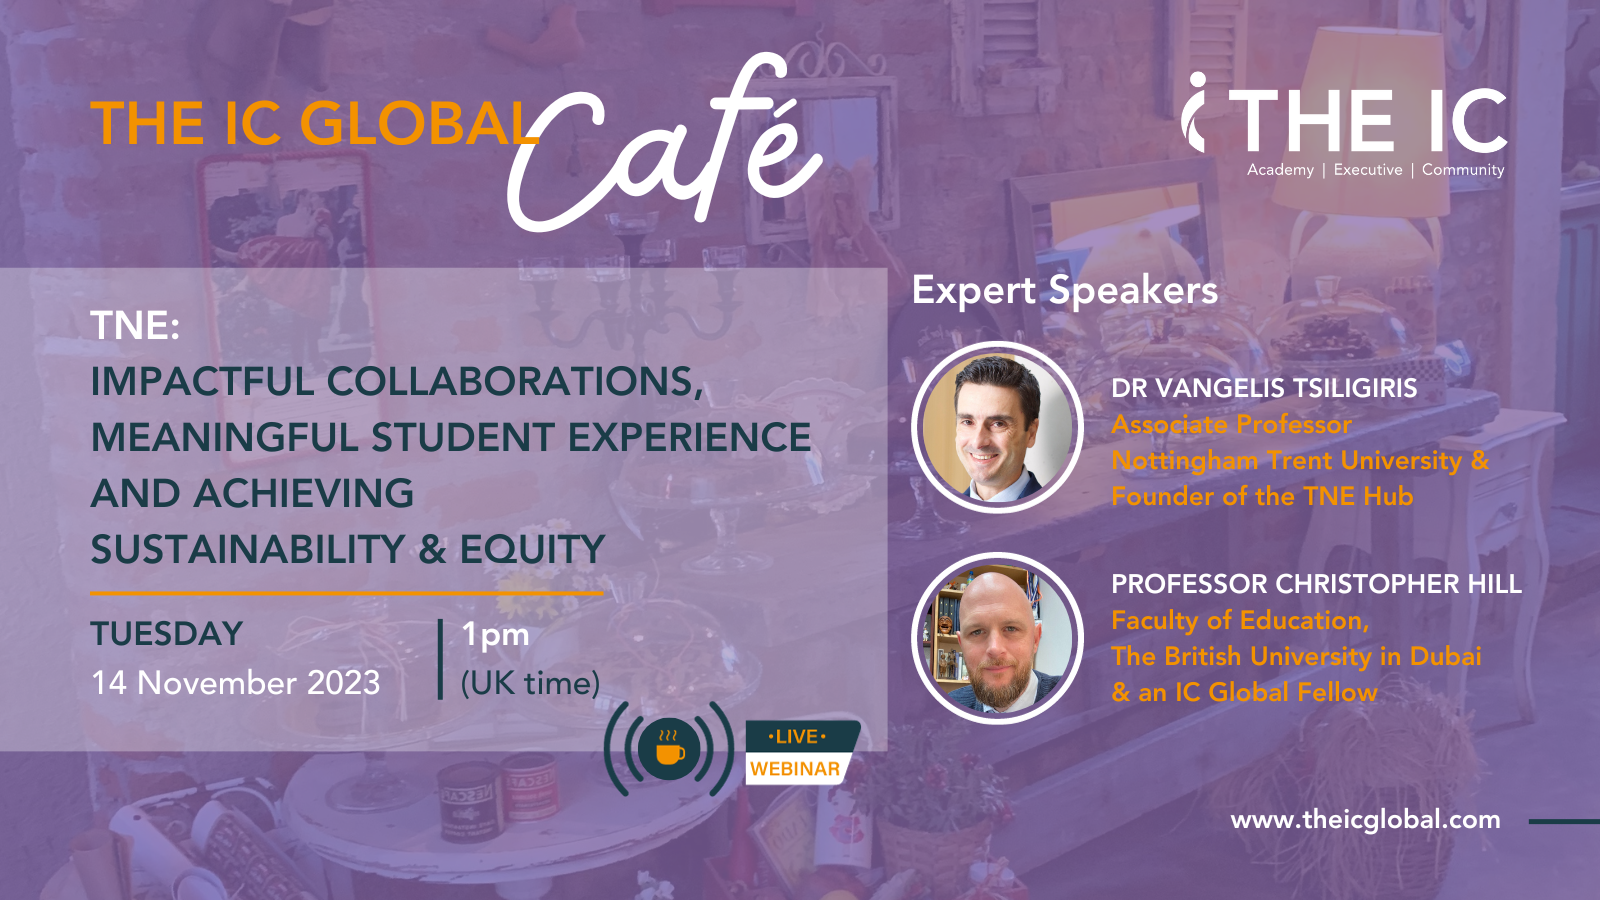 The IC Global Café: TNE: Impactful Collaborations, Meaningful Student Experience and Achieving Sustainability & Equity